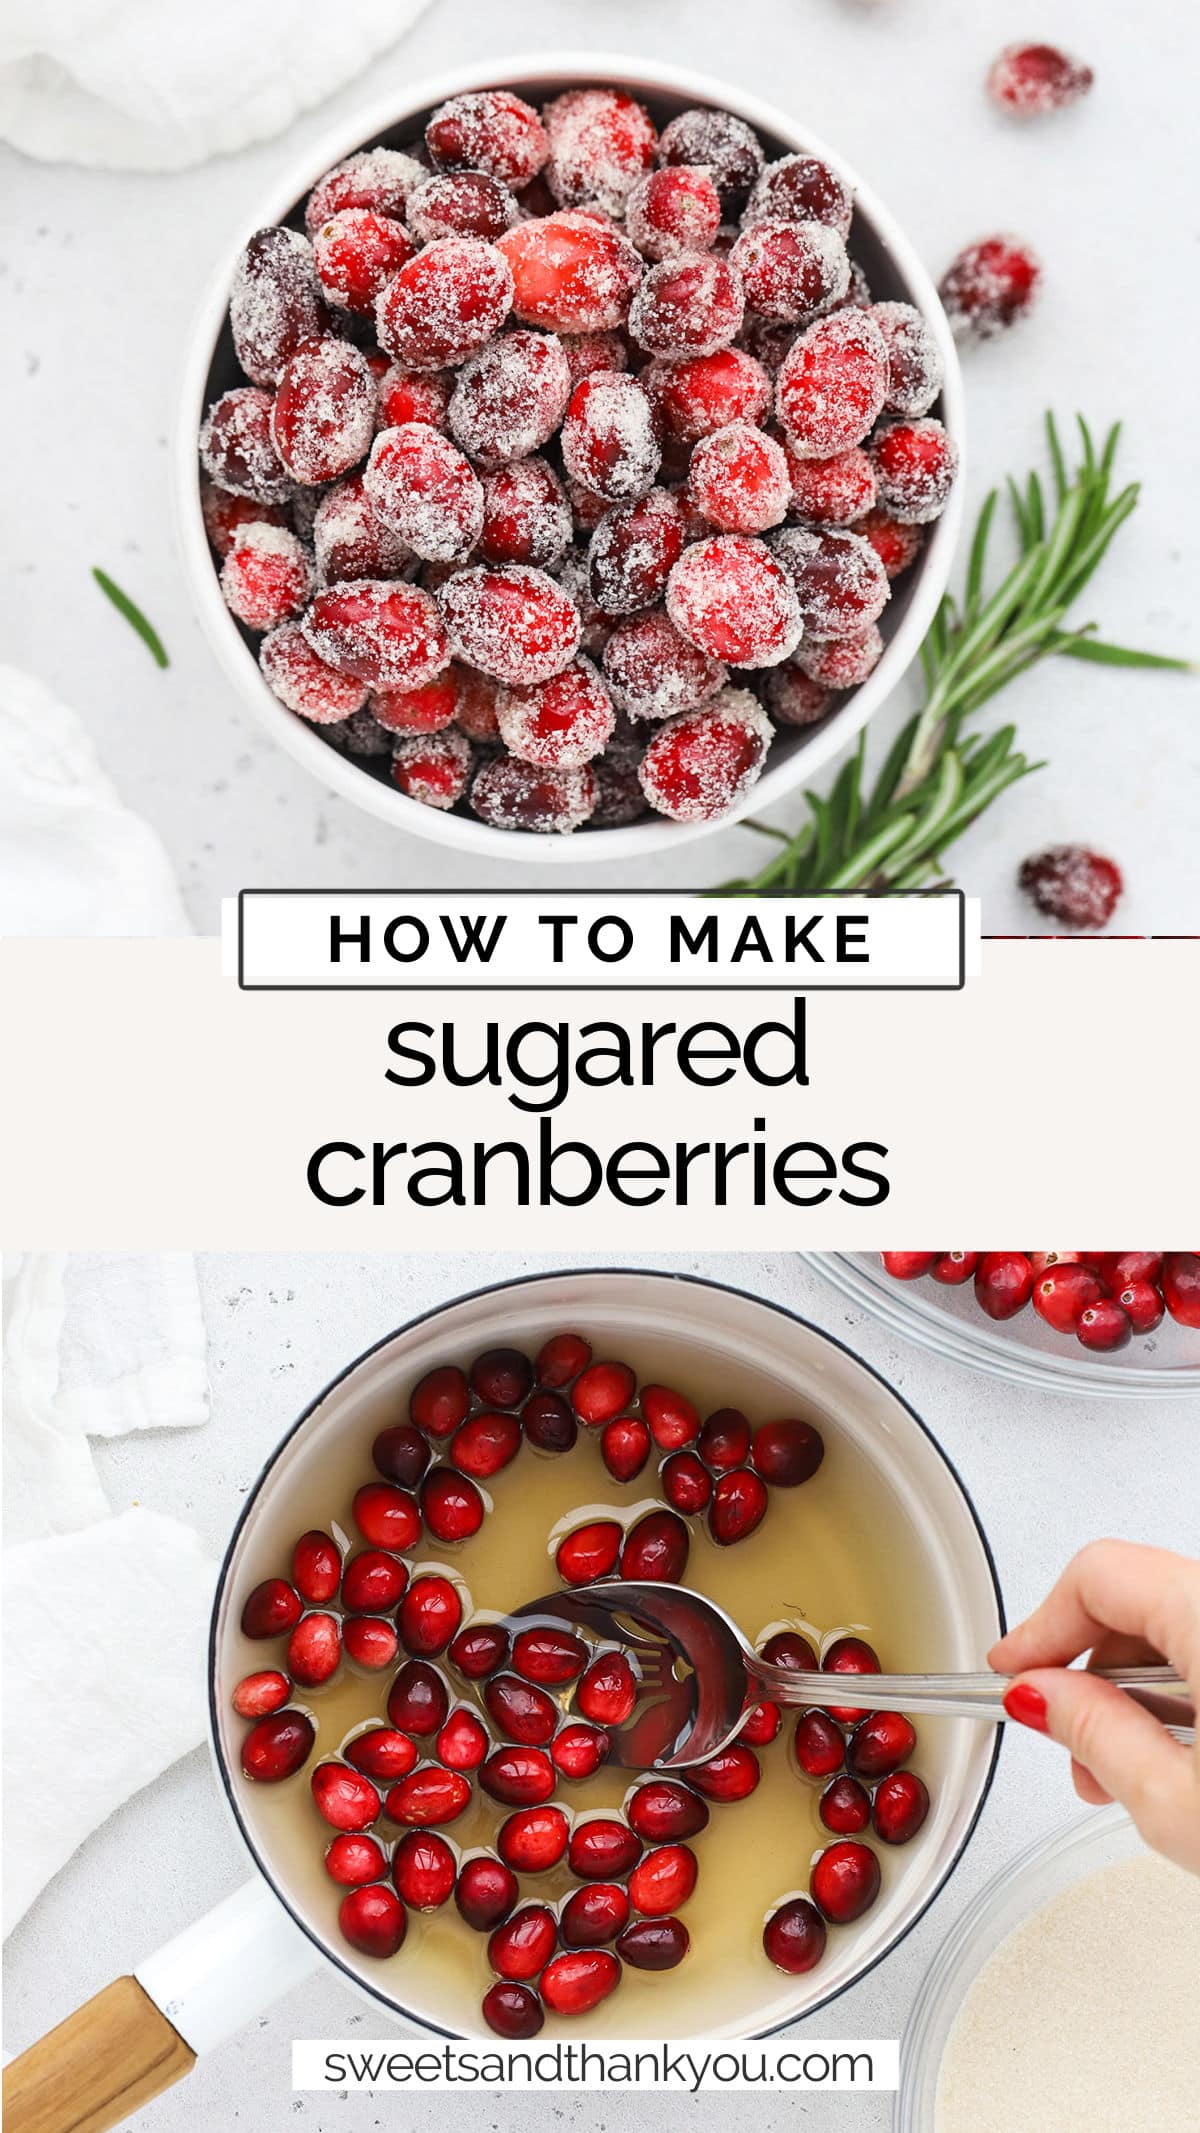 How To Make Sugared Cranberries - This easy sugar covered cranberries recipe adds a beautiful finish to so many holiday sweets, treats, and drinks! Don't miss all our ideas for using them below! / how to use sugared cranberries / ways to decorate with sugared cranberries / sugar coated cranberries recipe / sugar cranberries recipe / sugared cranberries tutorial / holiday cake decoration / cake decorating ideas / sparkling cranberries / holiday dessert ideas